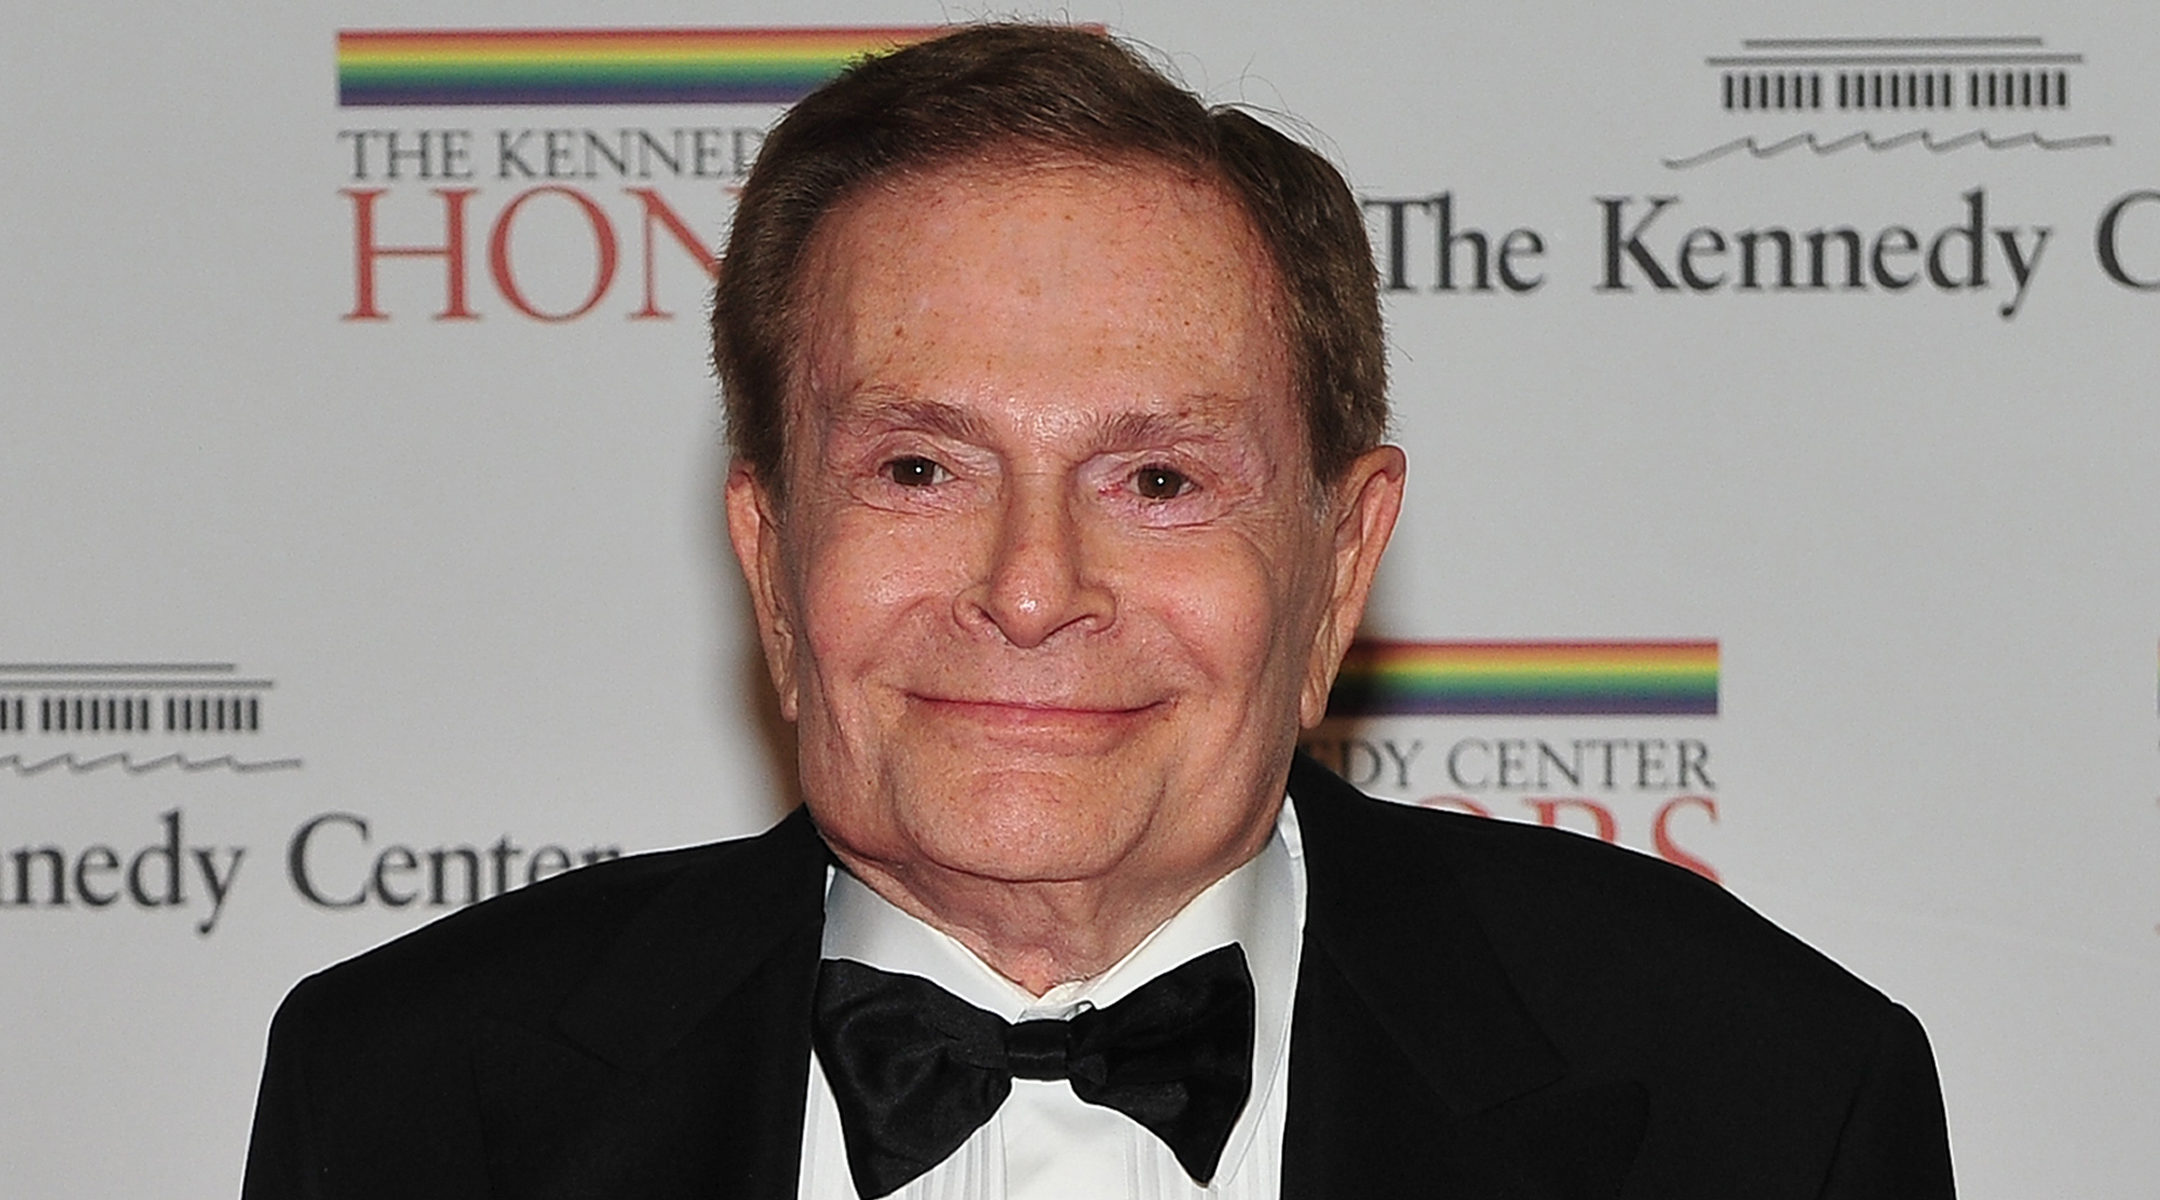 Jerry Herman at the Kennedy Center Honors at the United States Department of State in in Washington, D.C. on December 4, 2010. (Ron Sachs-Pool/Getty Images)